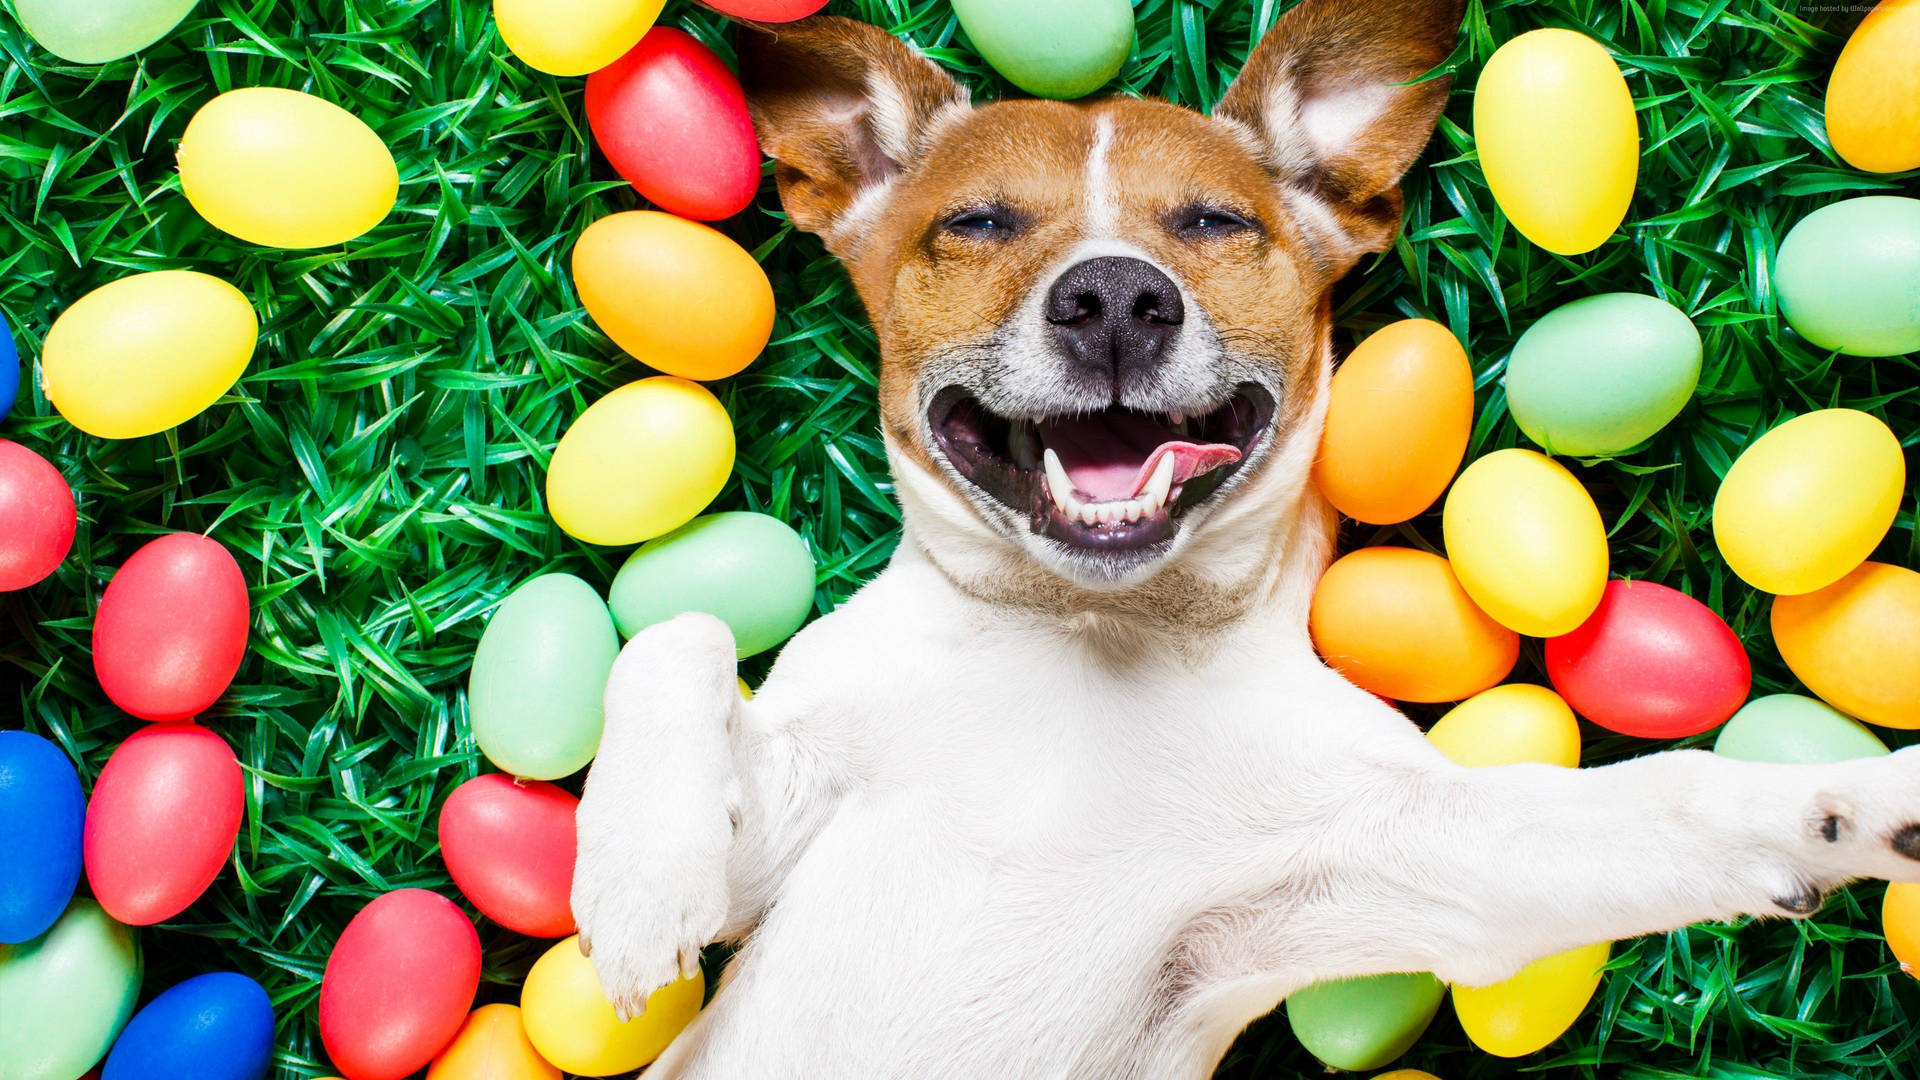 Springing Into Easter With Your Fluffy, Four-legged Friend